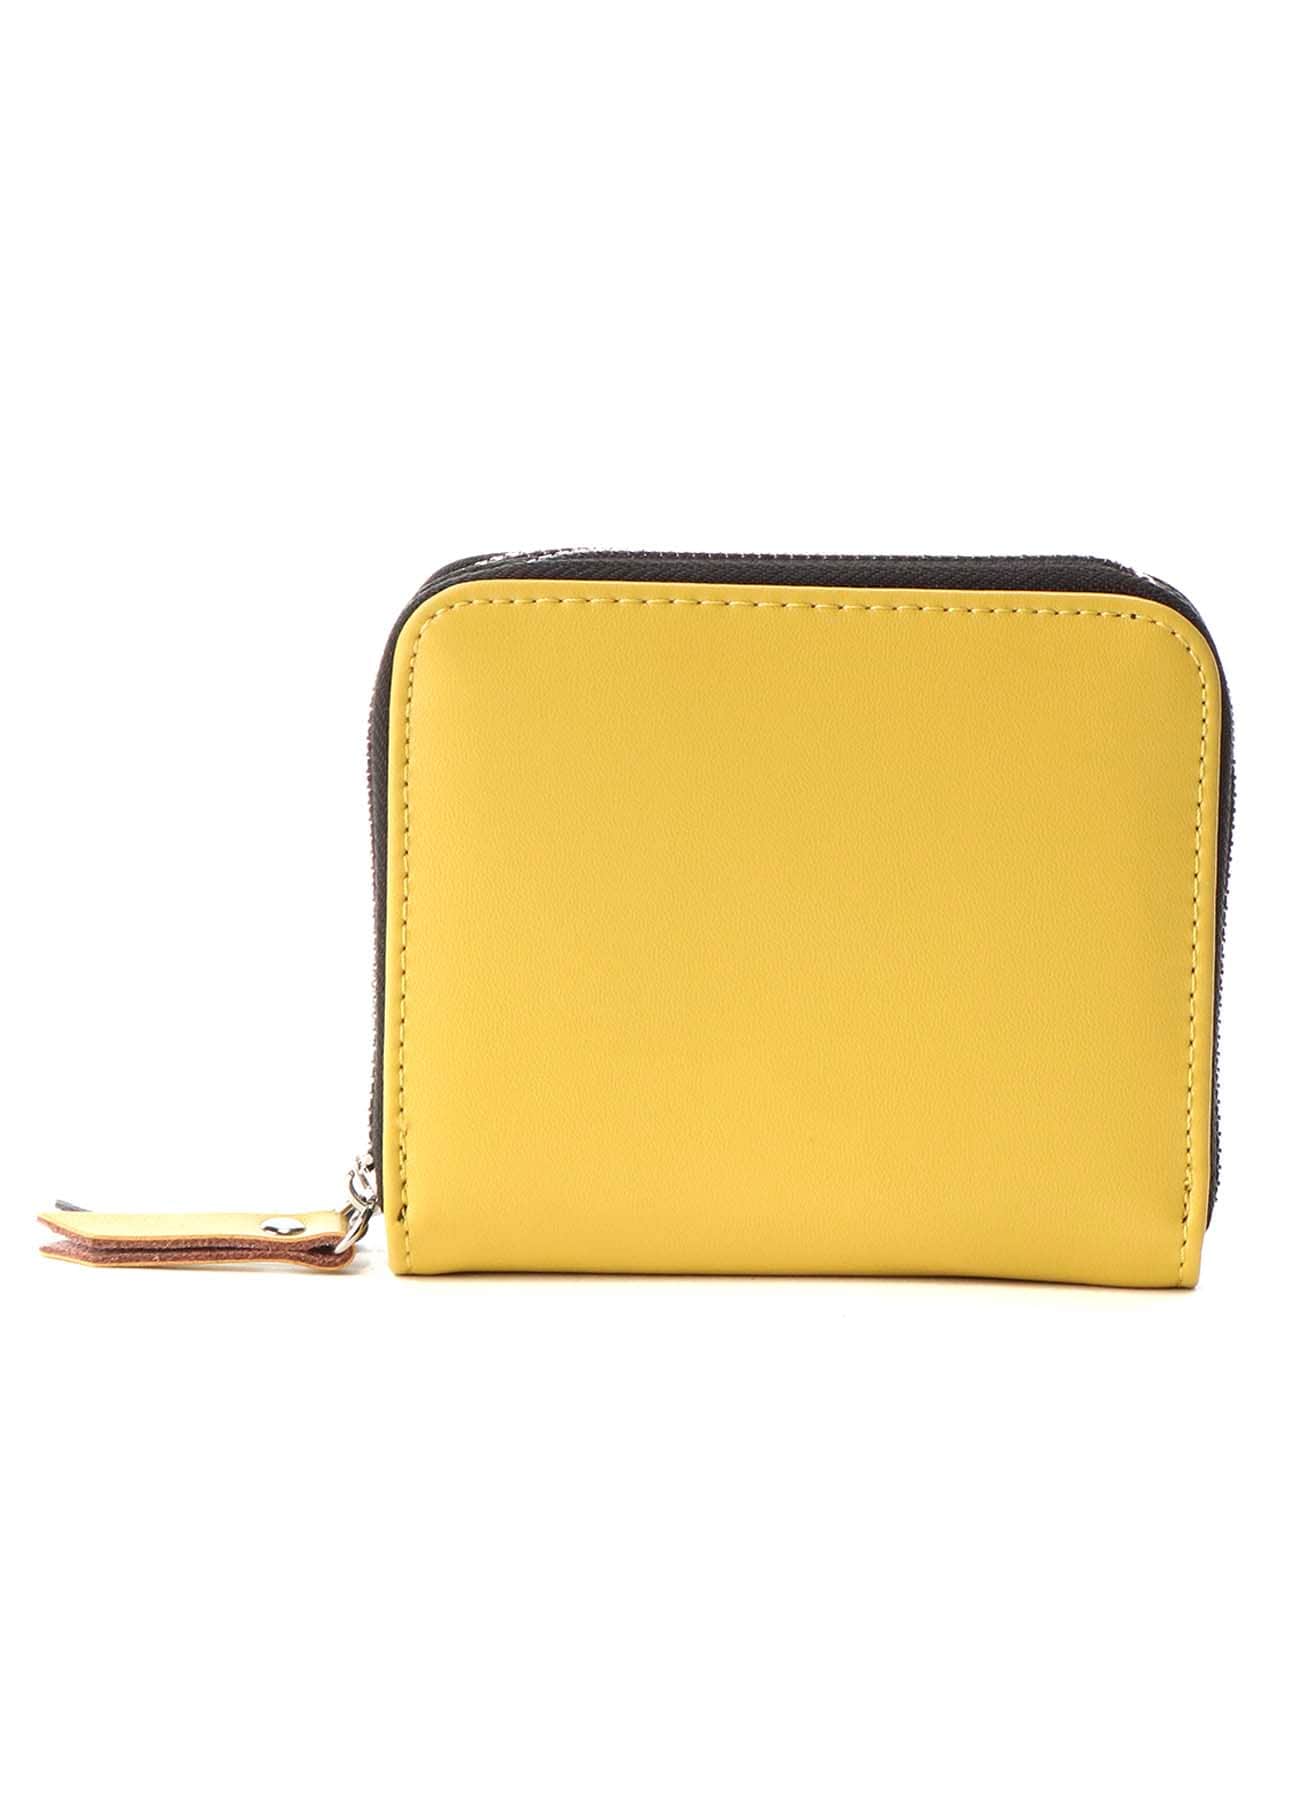 Split Leather 2 colors Zipper Wallet (FREE SIZE Yellow): GroundY 